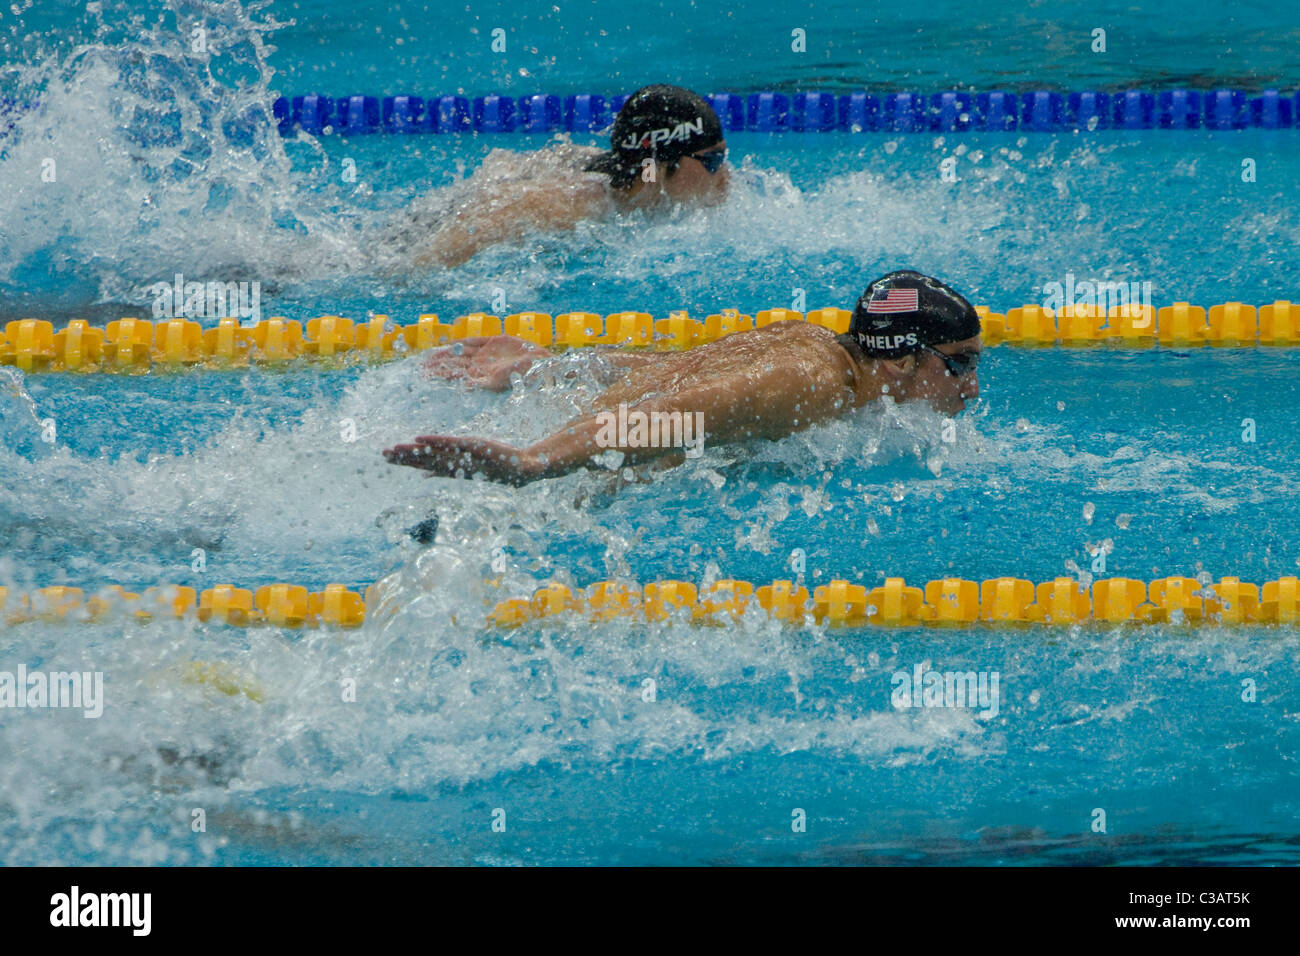 Michael Phelps swimming the butterfly leg of Men's 4x100 medley relayin the swimming competition at the 2008 Olympics Stock Photo